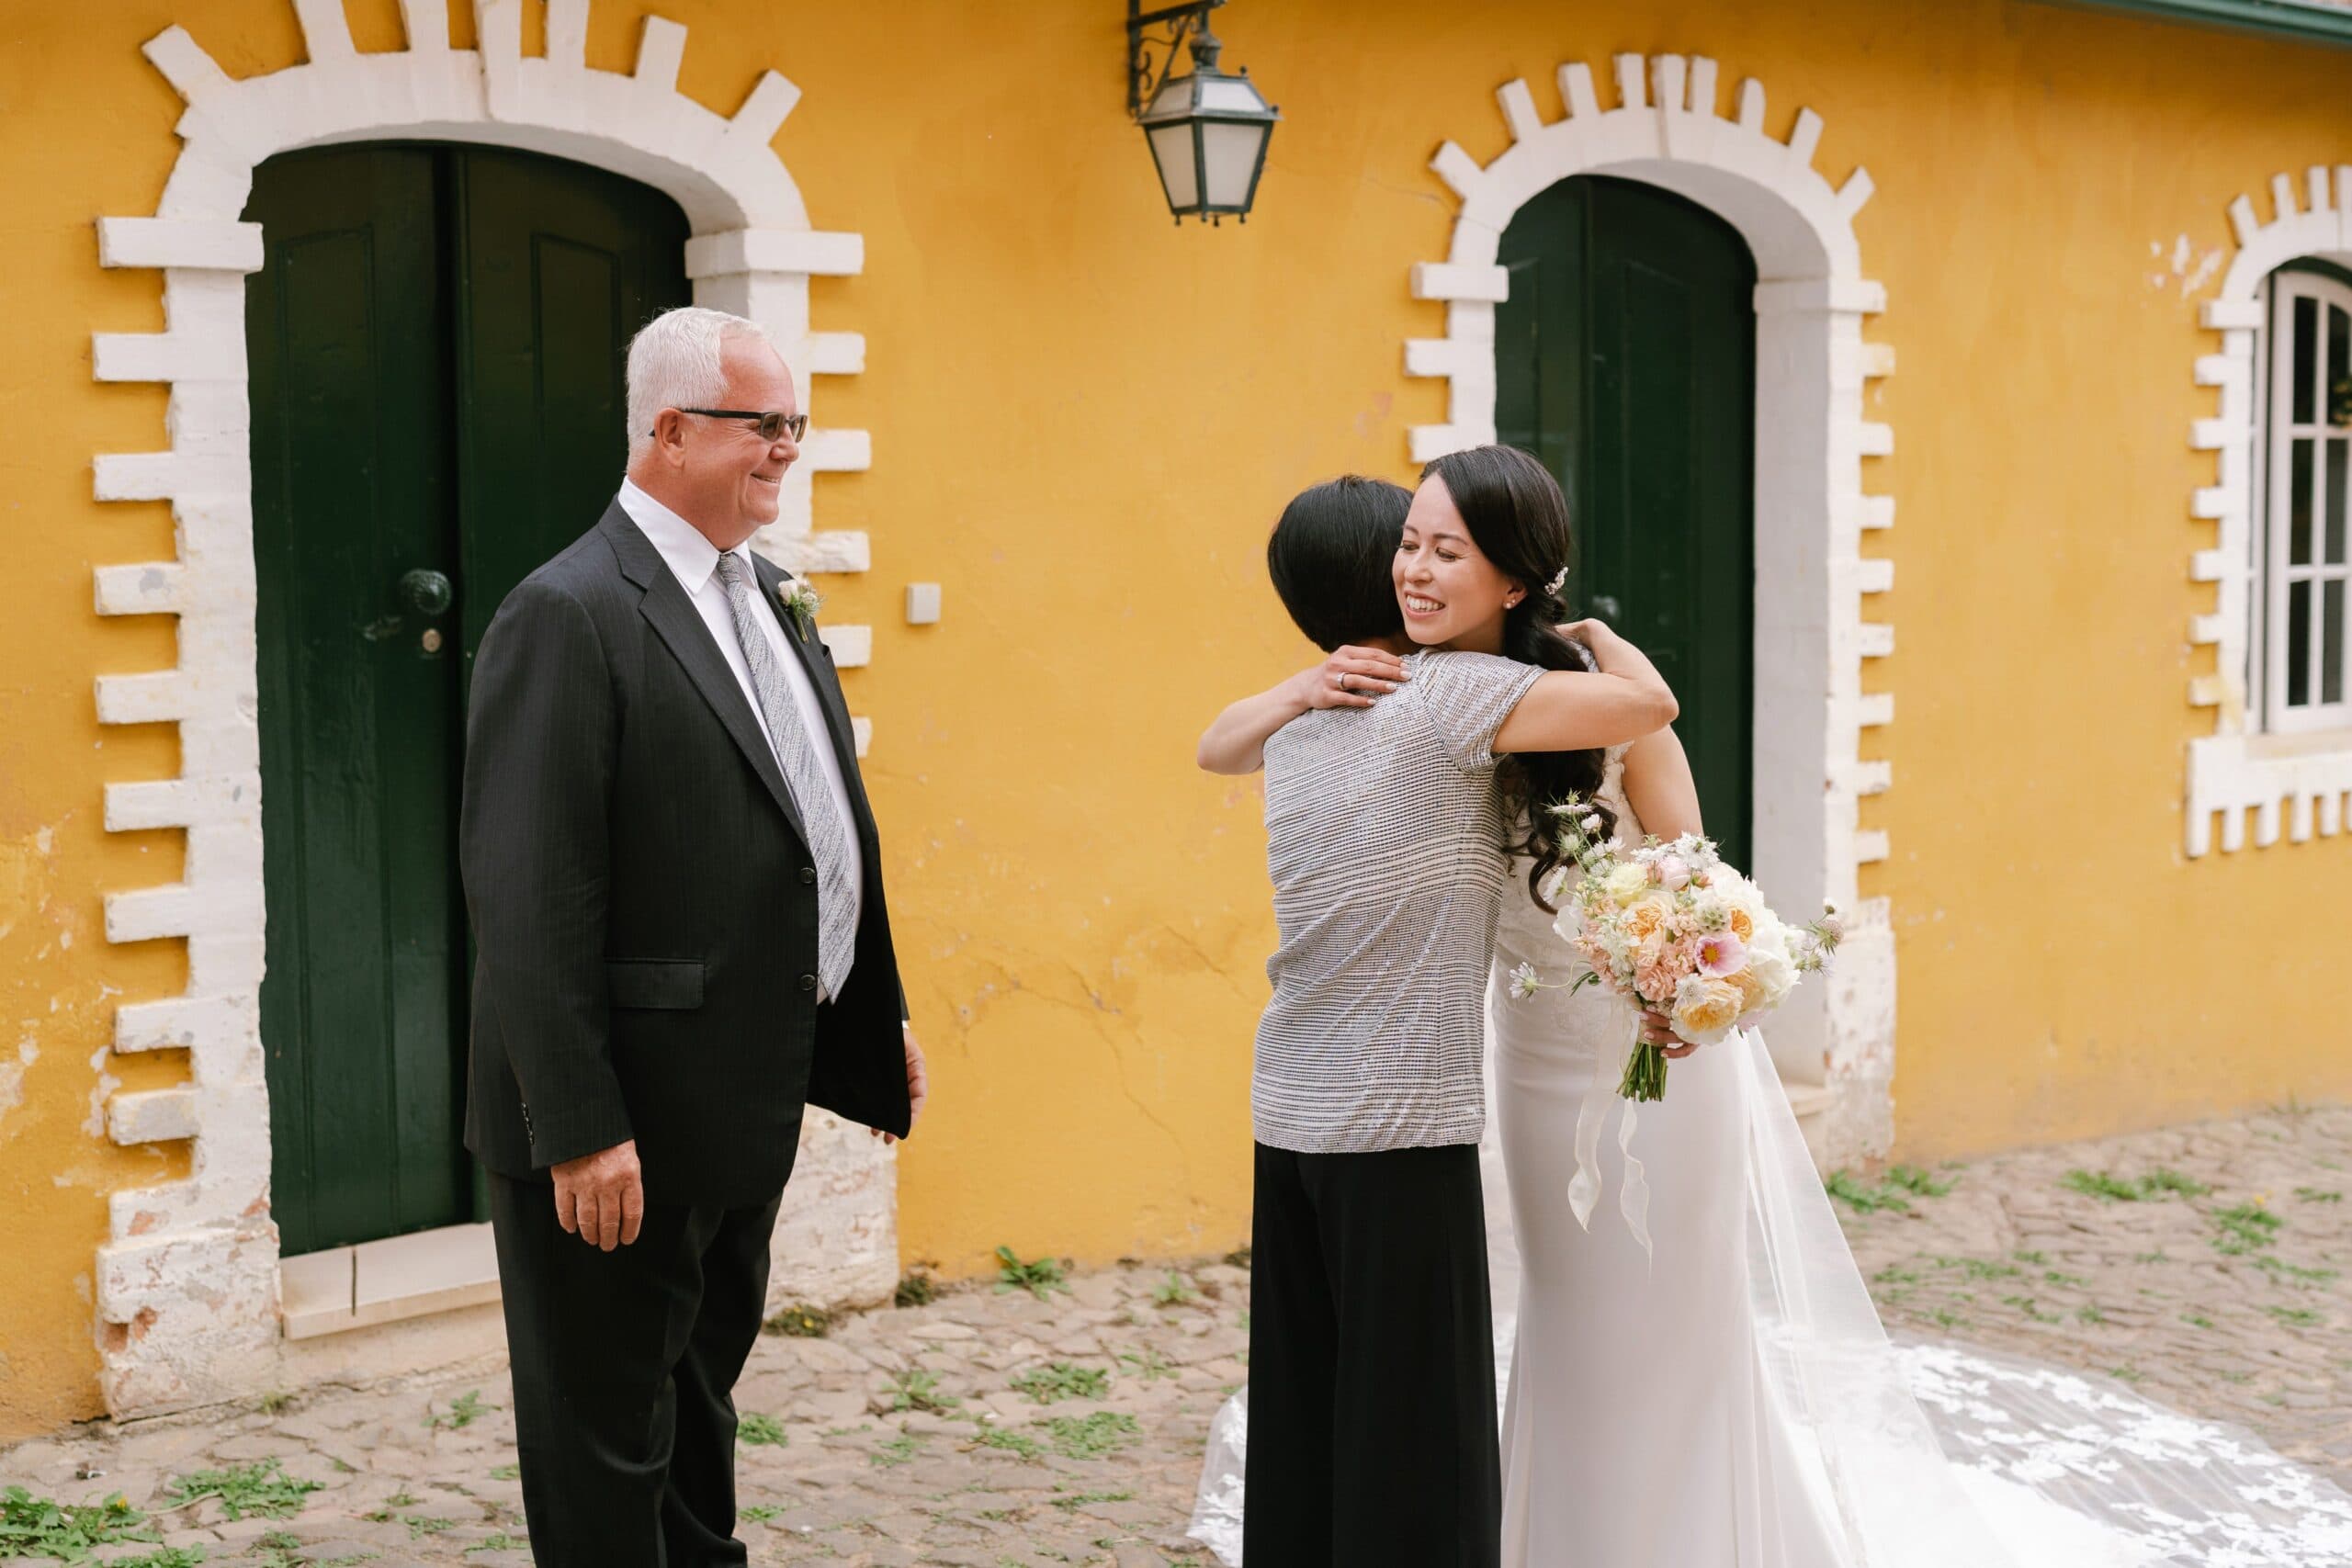 Bride having a first look with her parents, sharing a joyful embrace against a vibrant yellow background.